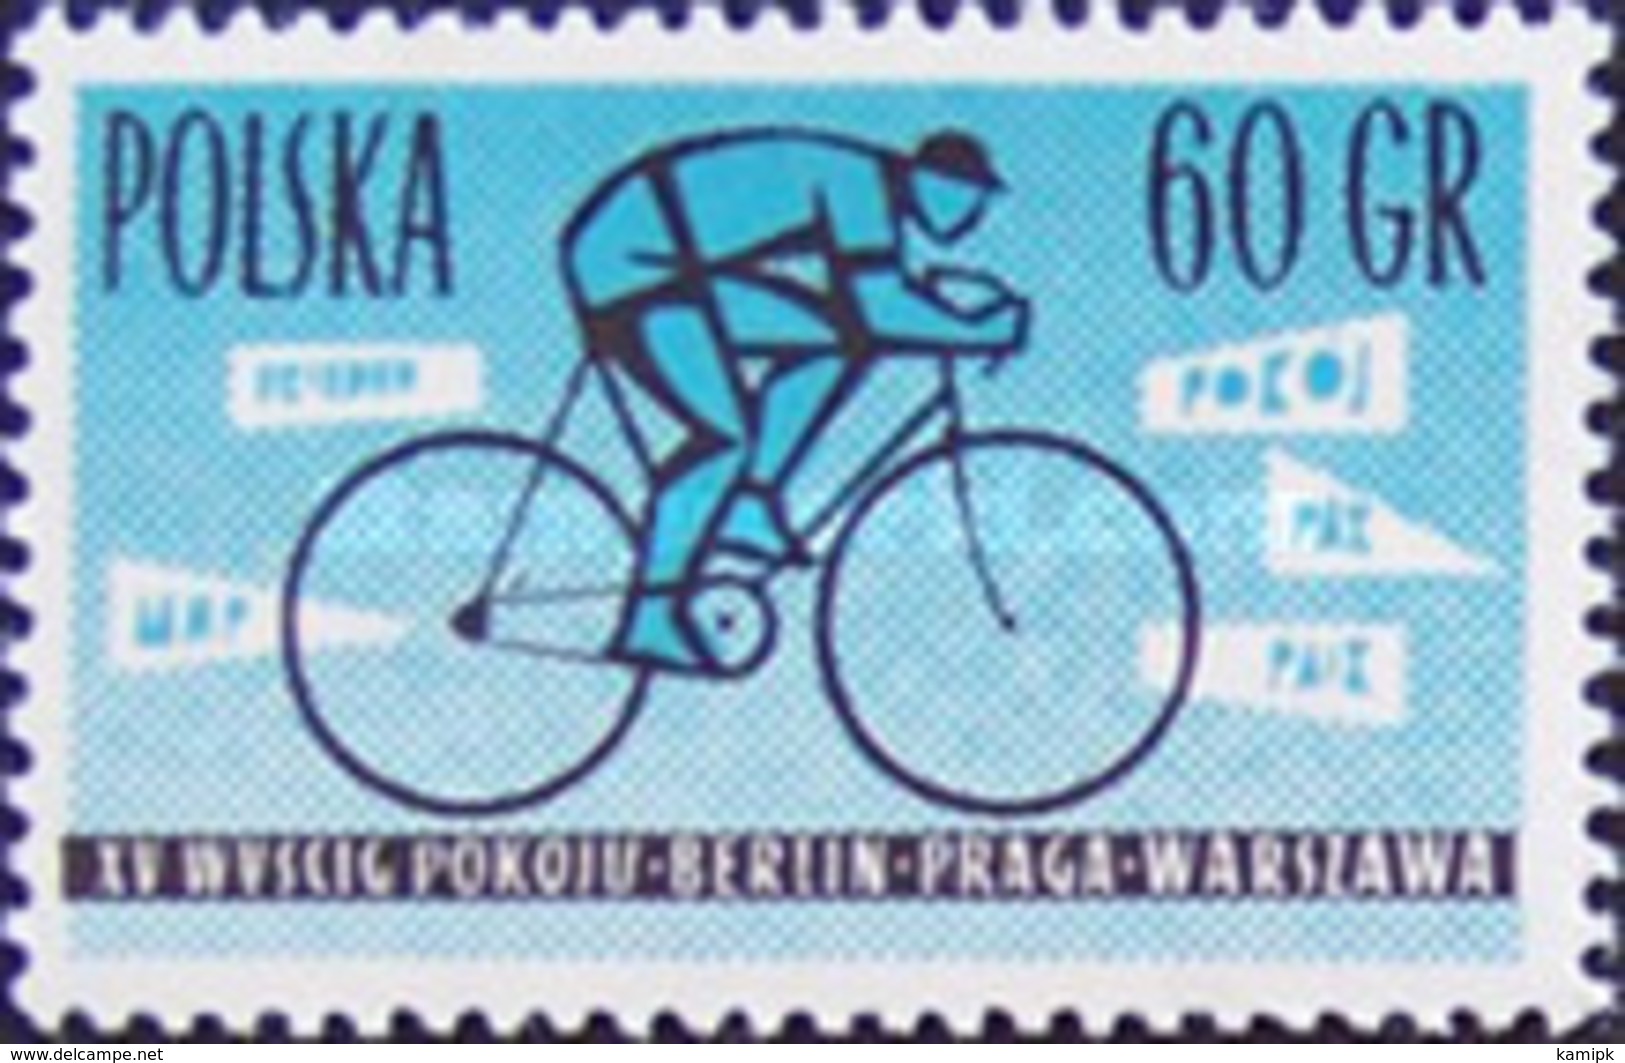 MH STAMPS Poland - The 15th International Bicycle Race For World Peace -1962 - Unused Stamps